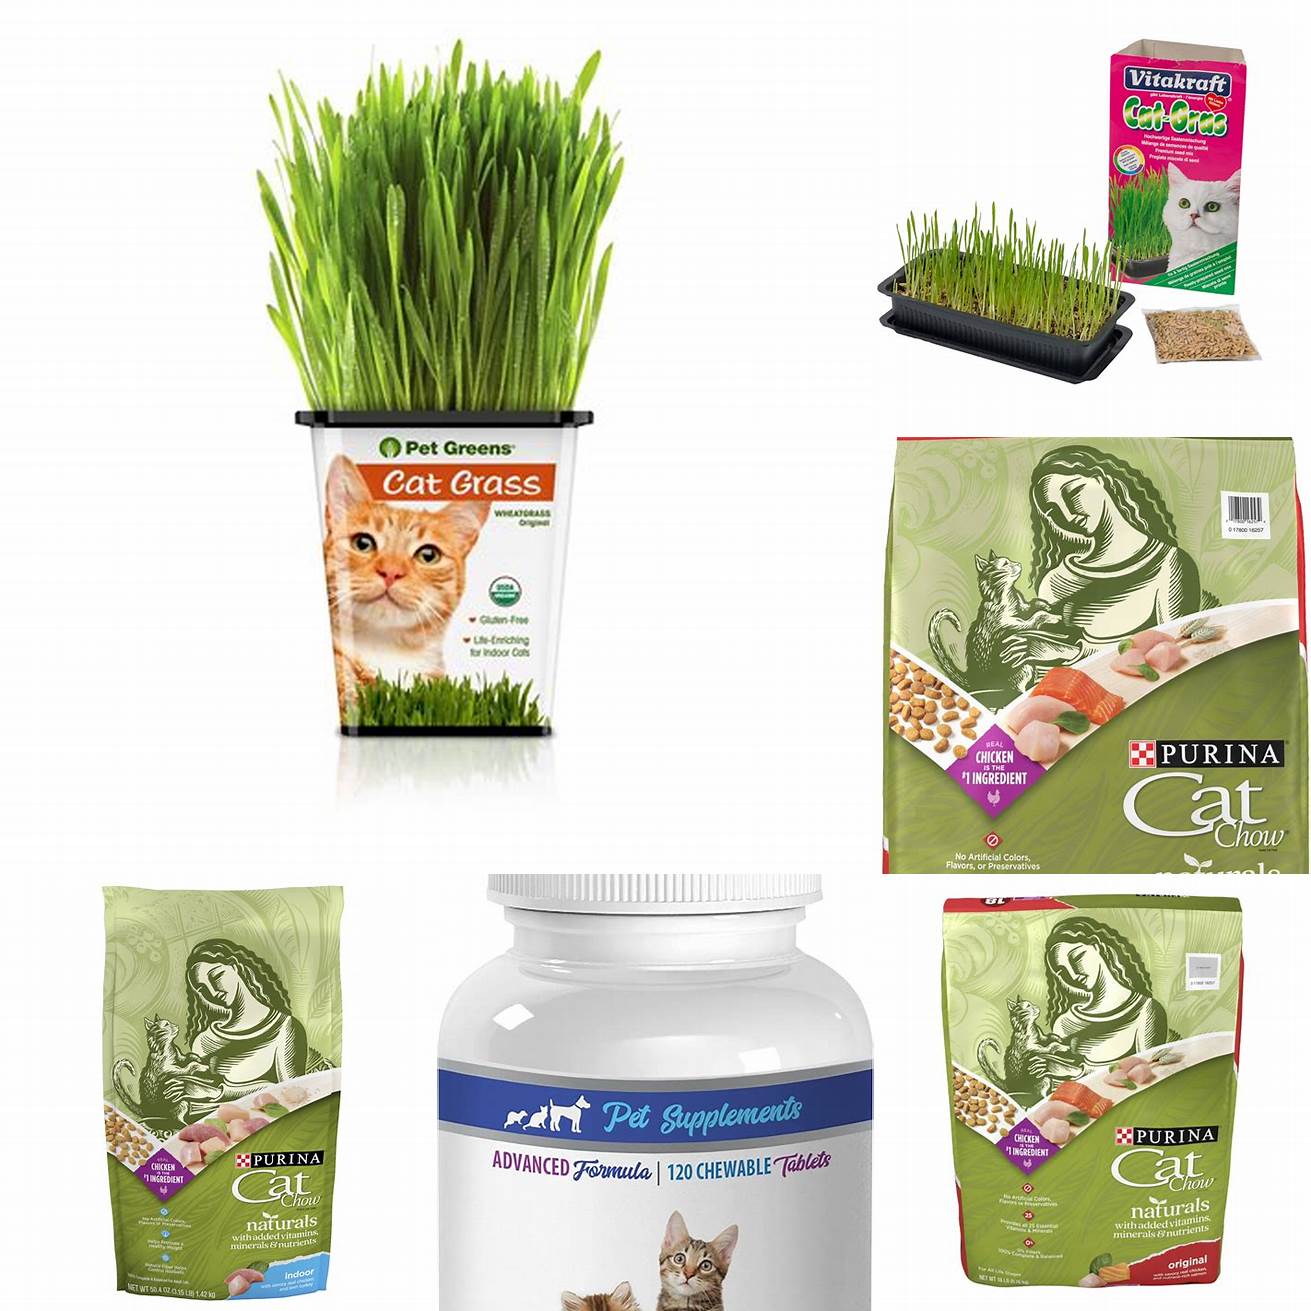 Providing essential nutrients Cat grass is rich in vitamins and minerals that are beneficial for your cats health